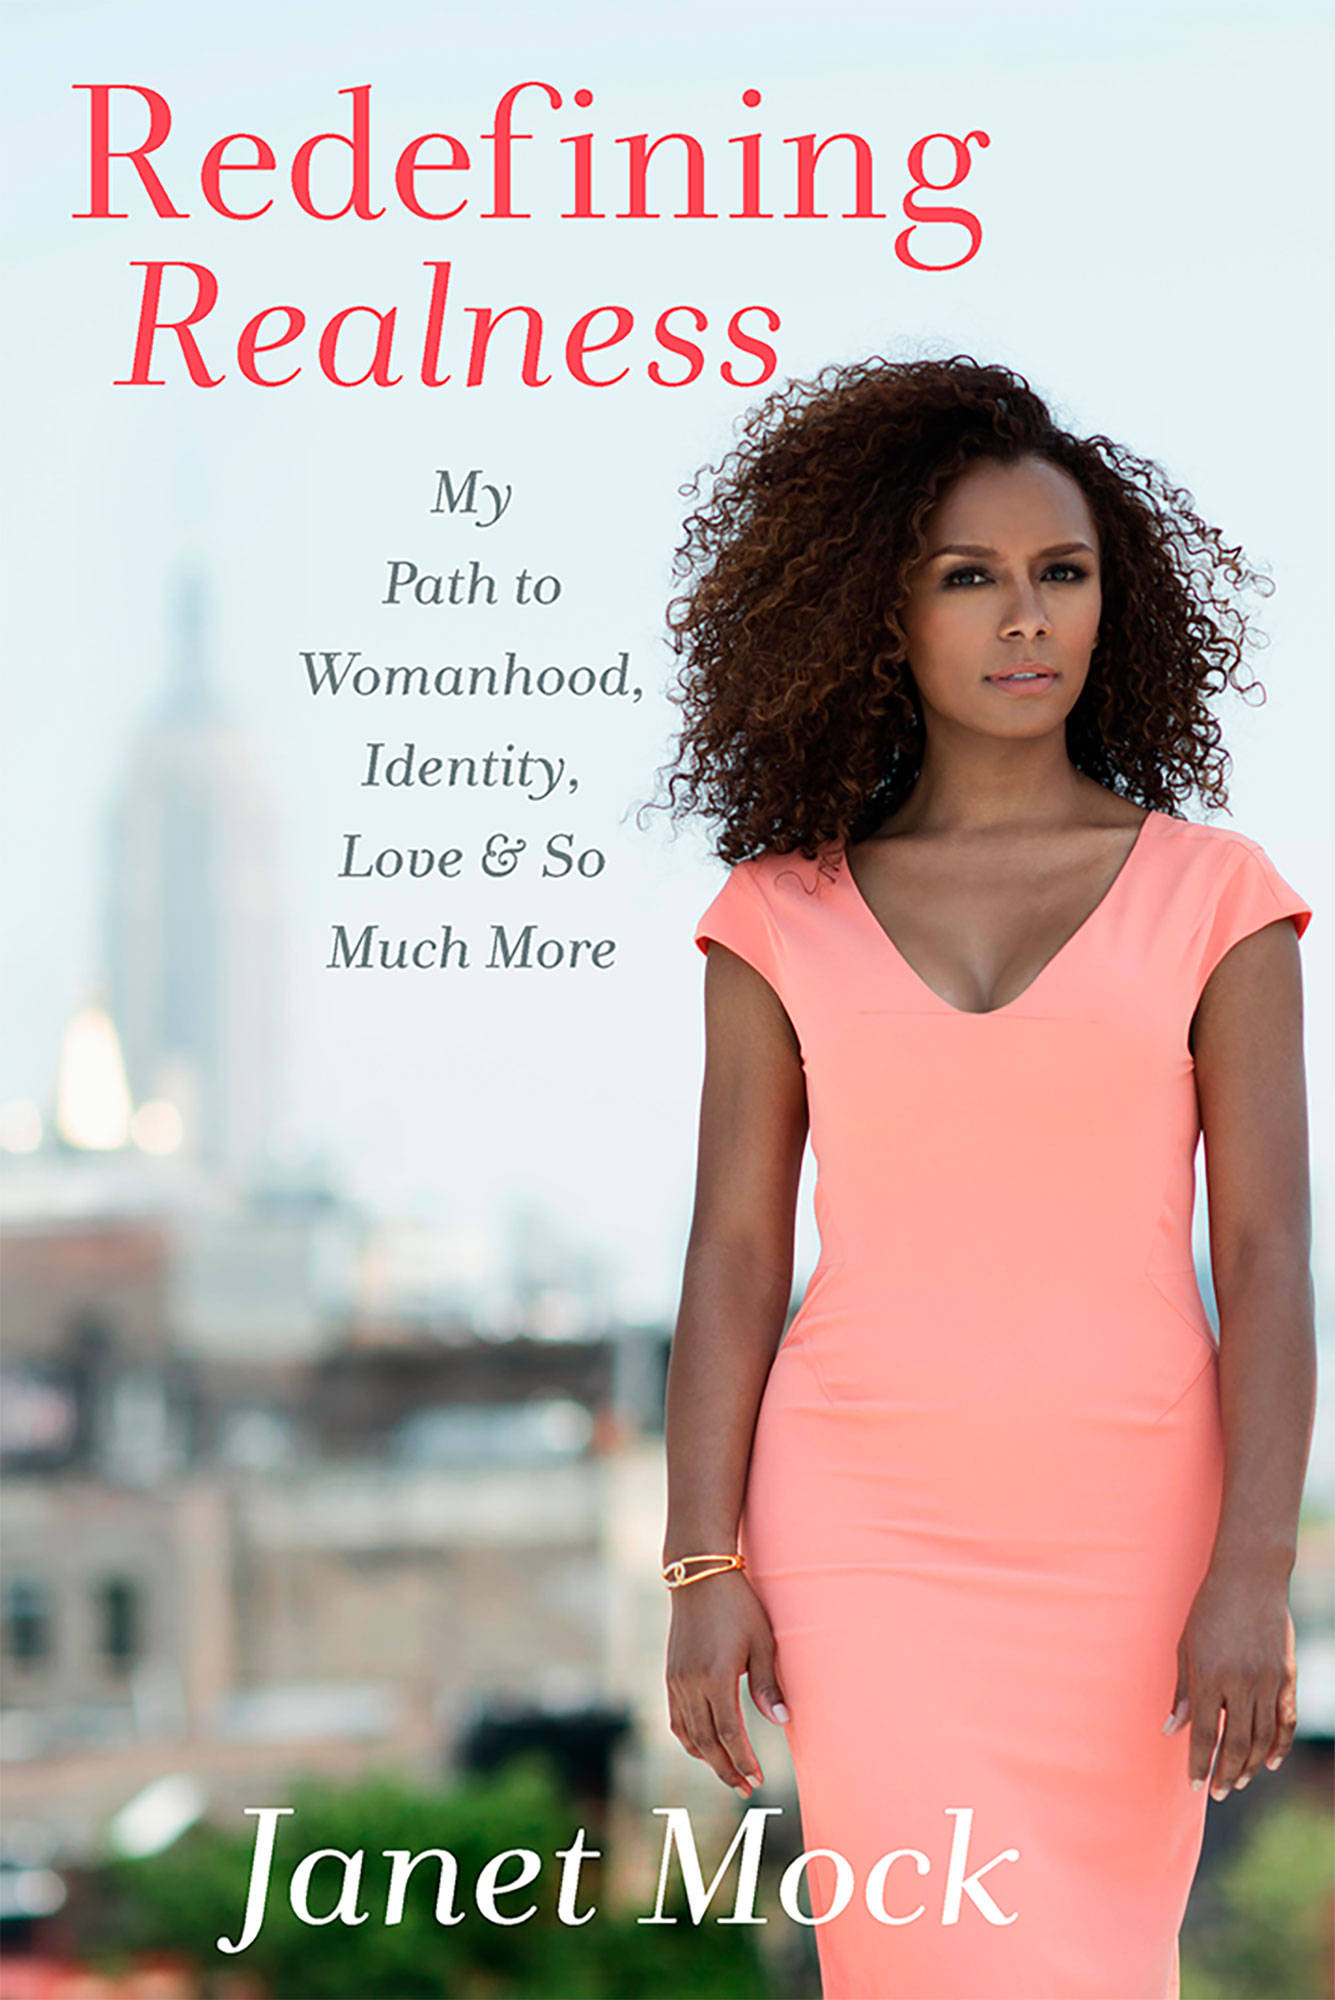 COVER: Woman with a pink dress standing in front of the city. The text "Redefining Realness" are above the woman with the author's name at the bottom. Book cover courtesy of janetmock.com. SOURCE: https://janetmock.com/books/